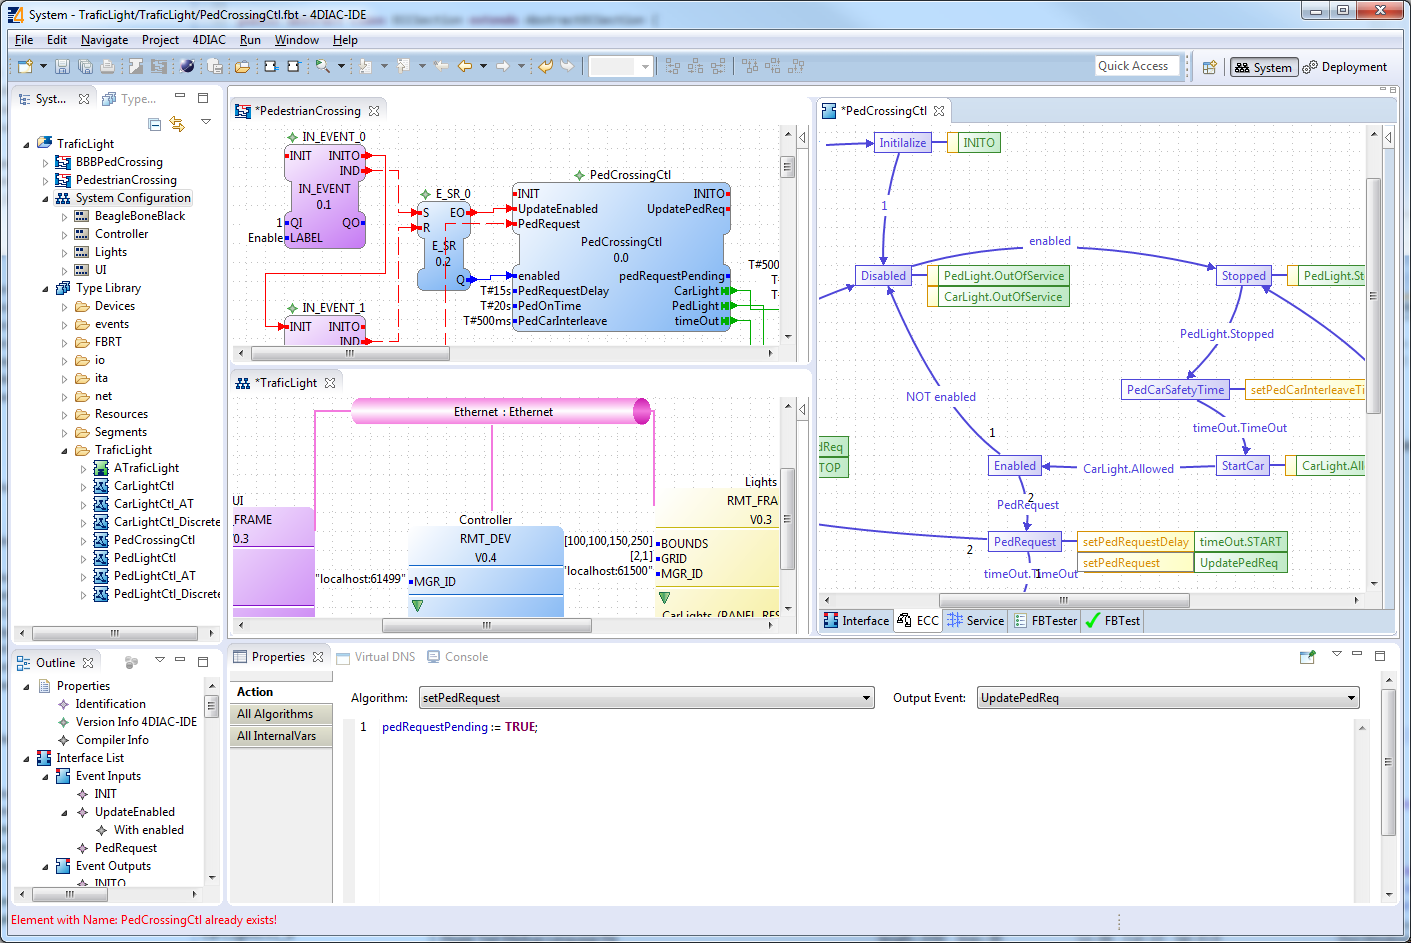 screenshot of the 4diac IDE engineering environment for distributed control systems showing the system explorer, the function block nework editor for applications, subapplications, and composite FBs, and an ECC editor modelling the state machine of basic function blocks